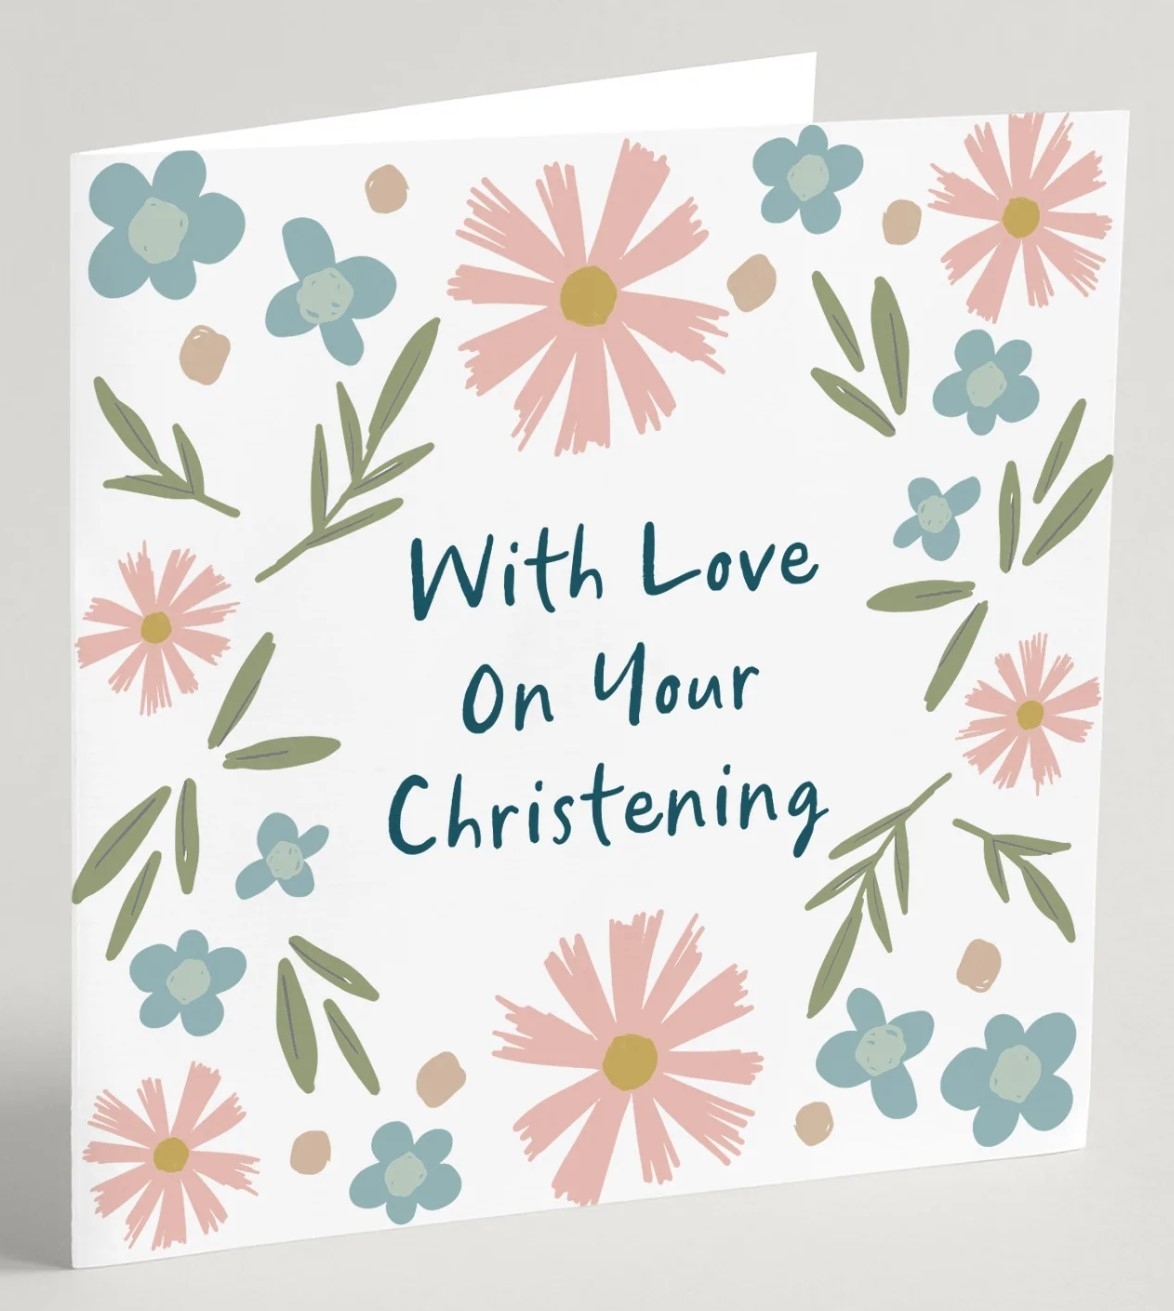 'With Love On Your Christening' Greeting Card & Envelope